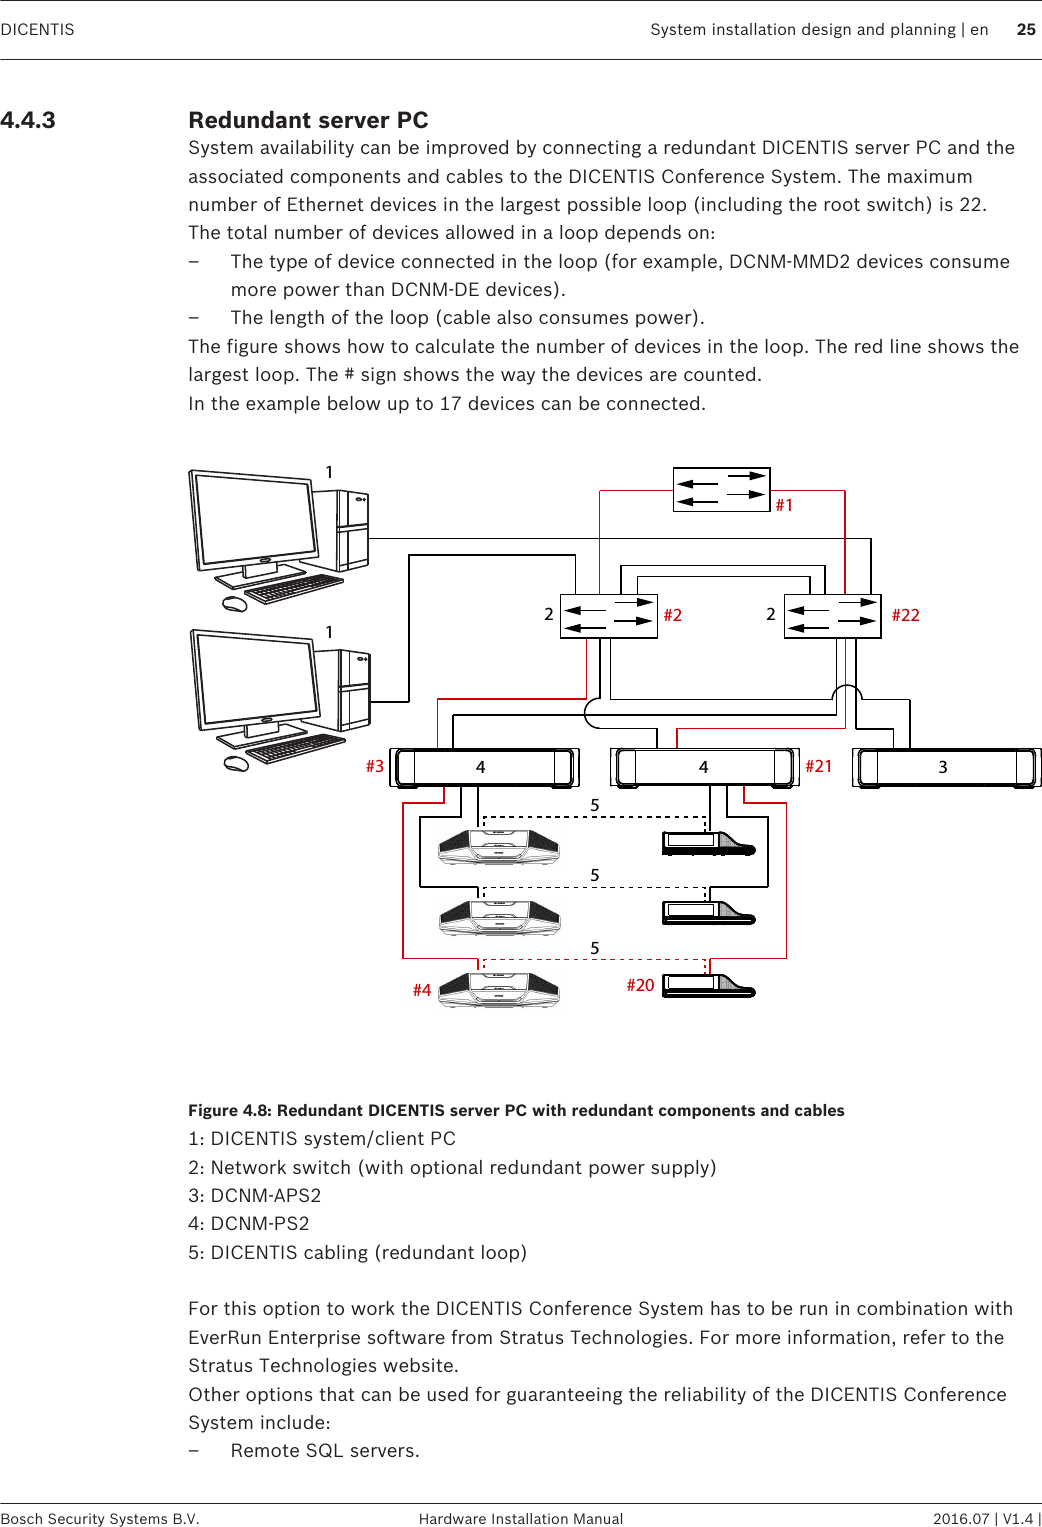 Redundant server PCSystem availability can be improved by connecting a redundant DICENTIS server PC and theassociated components and cables to the DICENTIS Conference System. The maximumnumber of Ethernet devices in the largest possible loop (including the root switch) is 22.The total number of devices allowed in a loop depends on:– The type of device connected in the loop (for example, DCNM-MMD2 devices consumemore power than DCNM-DE devices).– The length of the loop (cable also consumes power).The figure shows how to calculate the number of devices in the loop. The red line shows thelargest loop. The # sign shows the way the devices are counted.In the example below up to 17 devices can be connected. #4 #20#2#3 #21#22#11144555322Figure 4.8: Redundant DICENTIS server PC with redundant components and cables1: DICENTIS system/client PC2: Network switch (with optional redundant power supply)3: DCNM-APS24: DCNM-PS25: DICENTIS cabling (redundant loop) For this option to work the DICENTIS Conference System has to be run in combination withEverRun Enterprise software from Stratus Technologies. For more information, refer to theStratus Technologies website.Other options that can be used for guaranteeing the reliability of the DICENTIS ConferenceSystem include:– Remote SQL servers. 4.4.3DICENTIS System installation design and planning | en 25Bosch Security Systems B.V. Hardware Installation Manual 2016.07 | V1.4 |